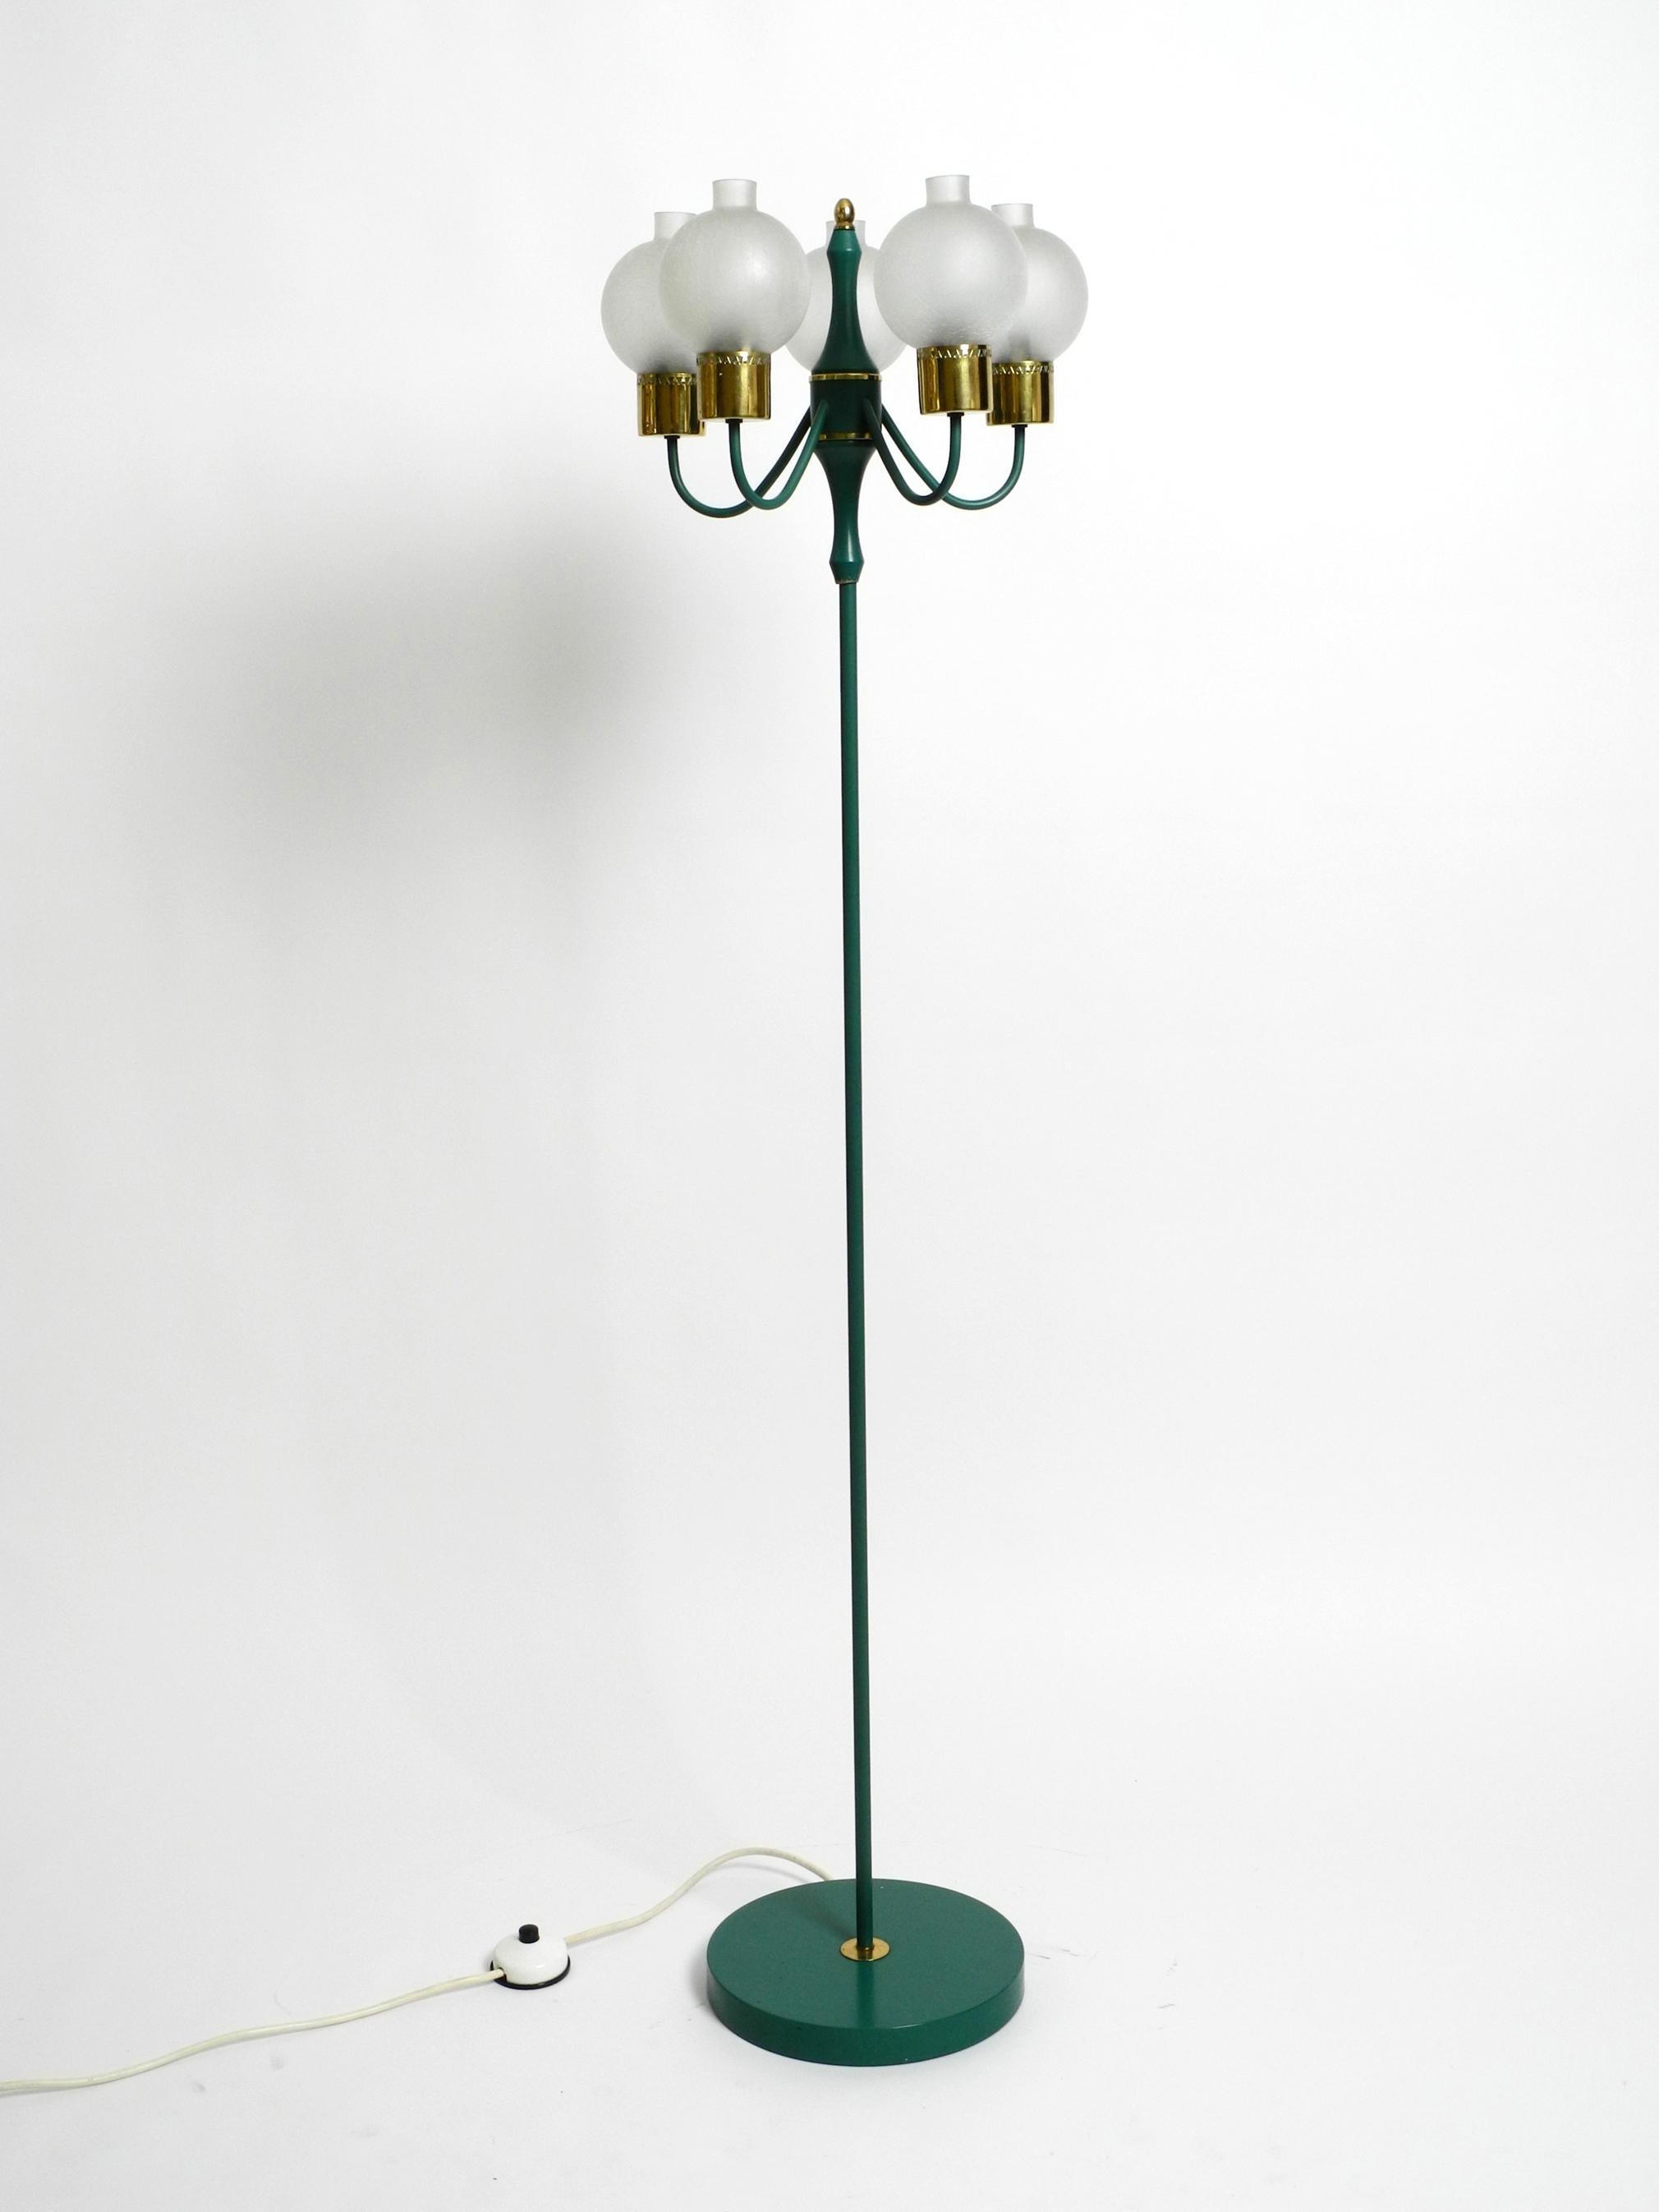 Original 1960s Kaiser Metal Floor Lamp with 5 Ice Glass Shades in Forest Green 13